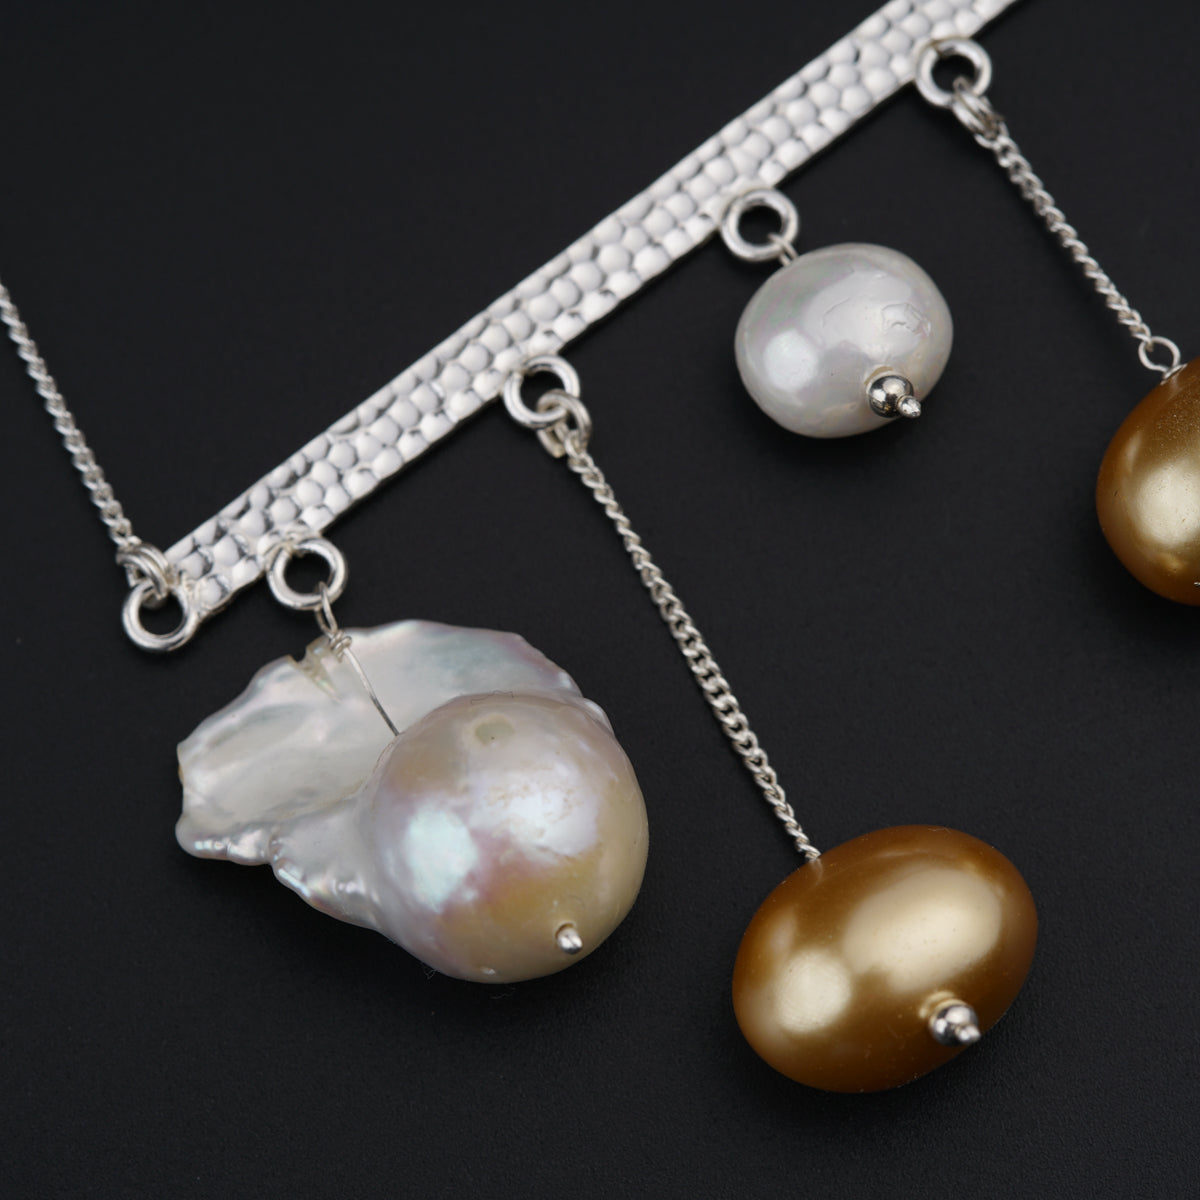 Abstract silver necklace : Pearls